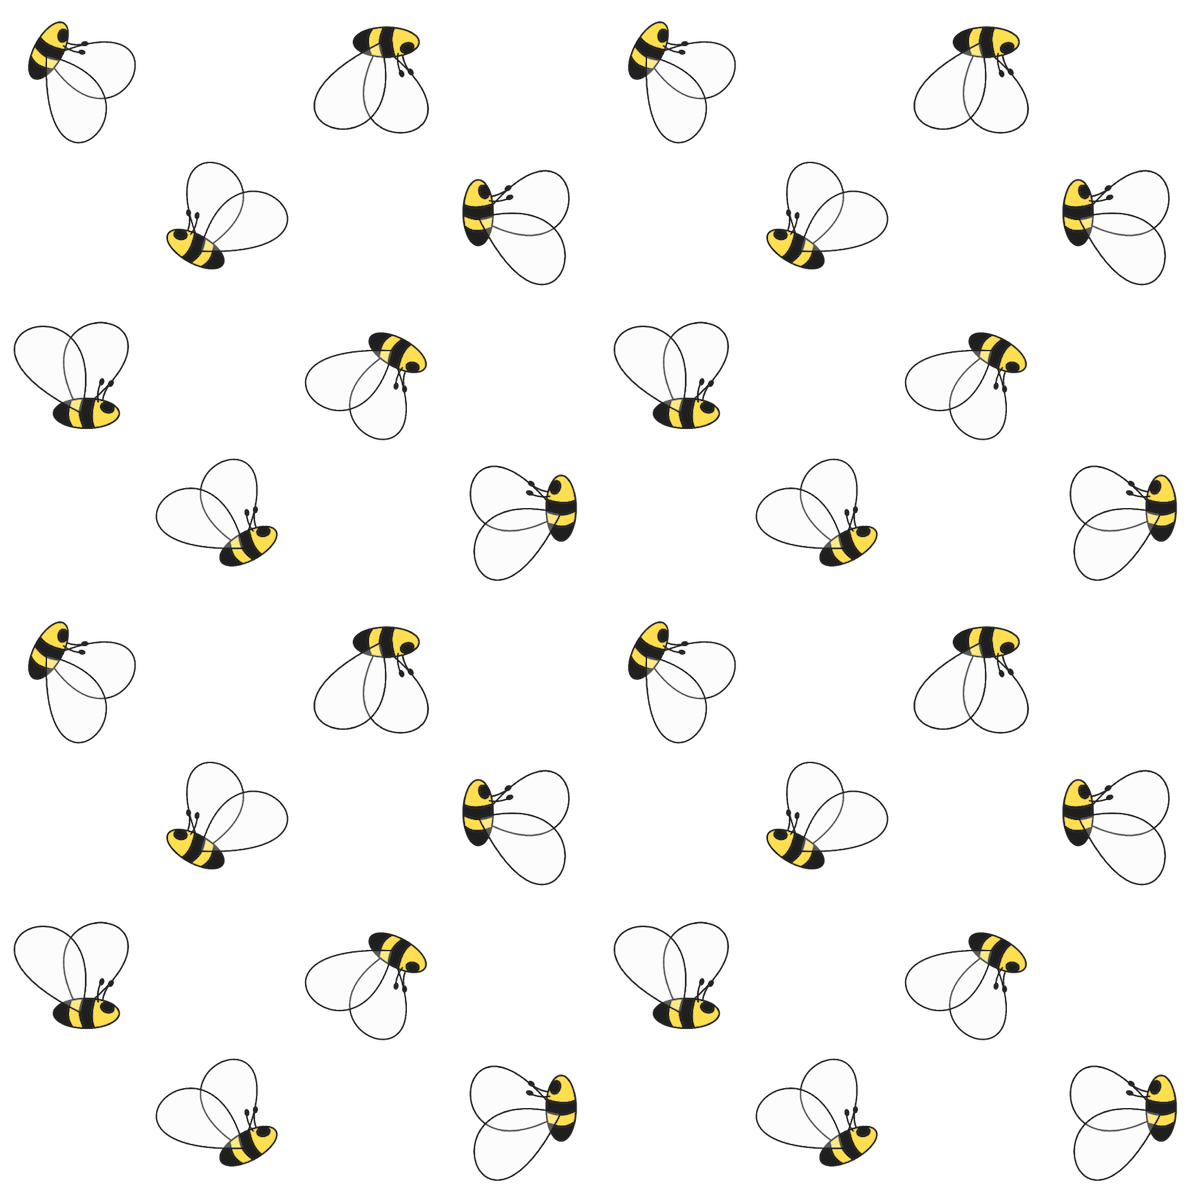 winnie the pooh bees clipart